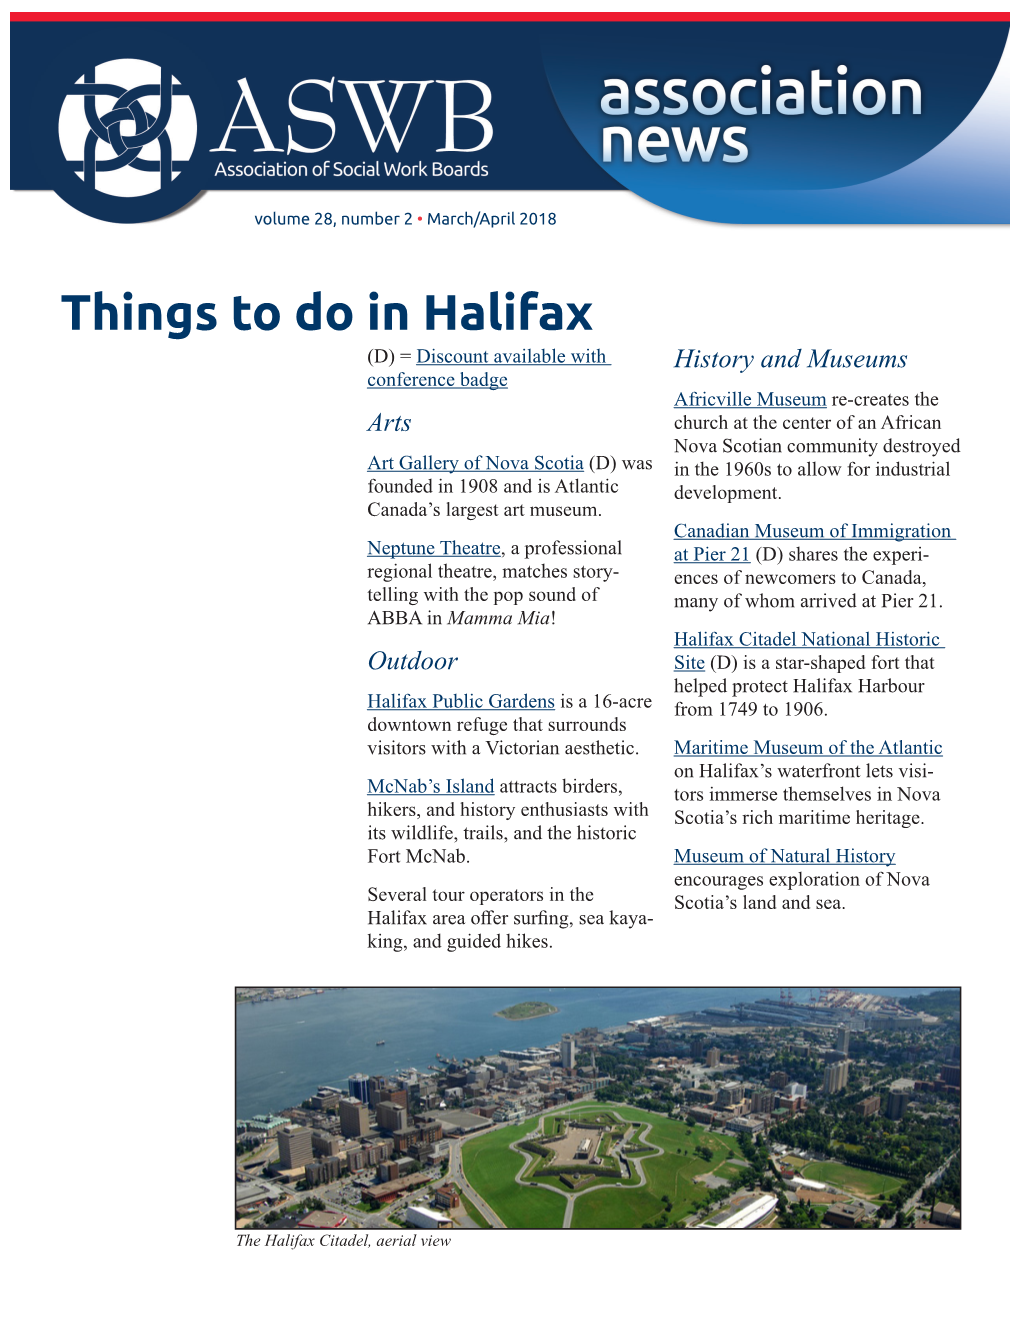 Things to Do in Halifax